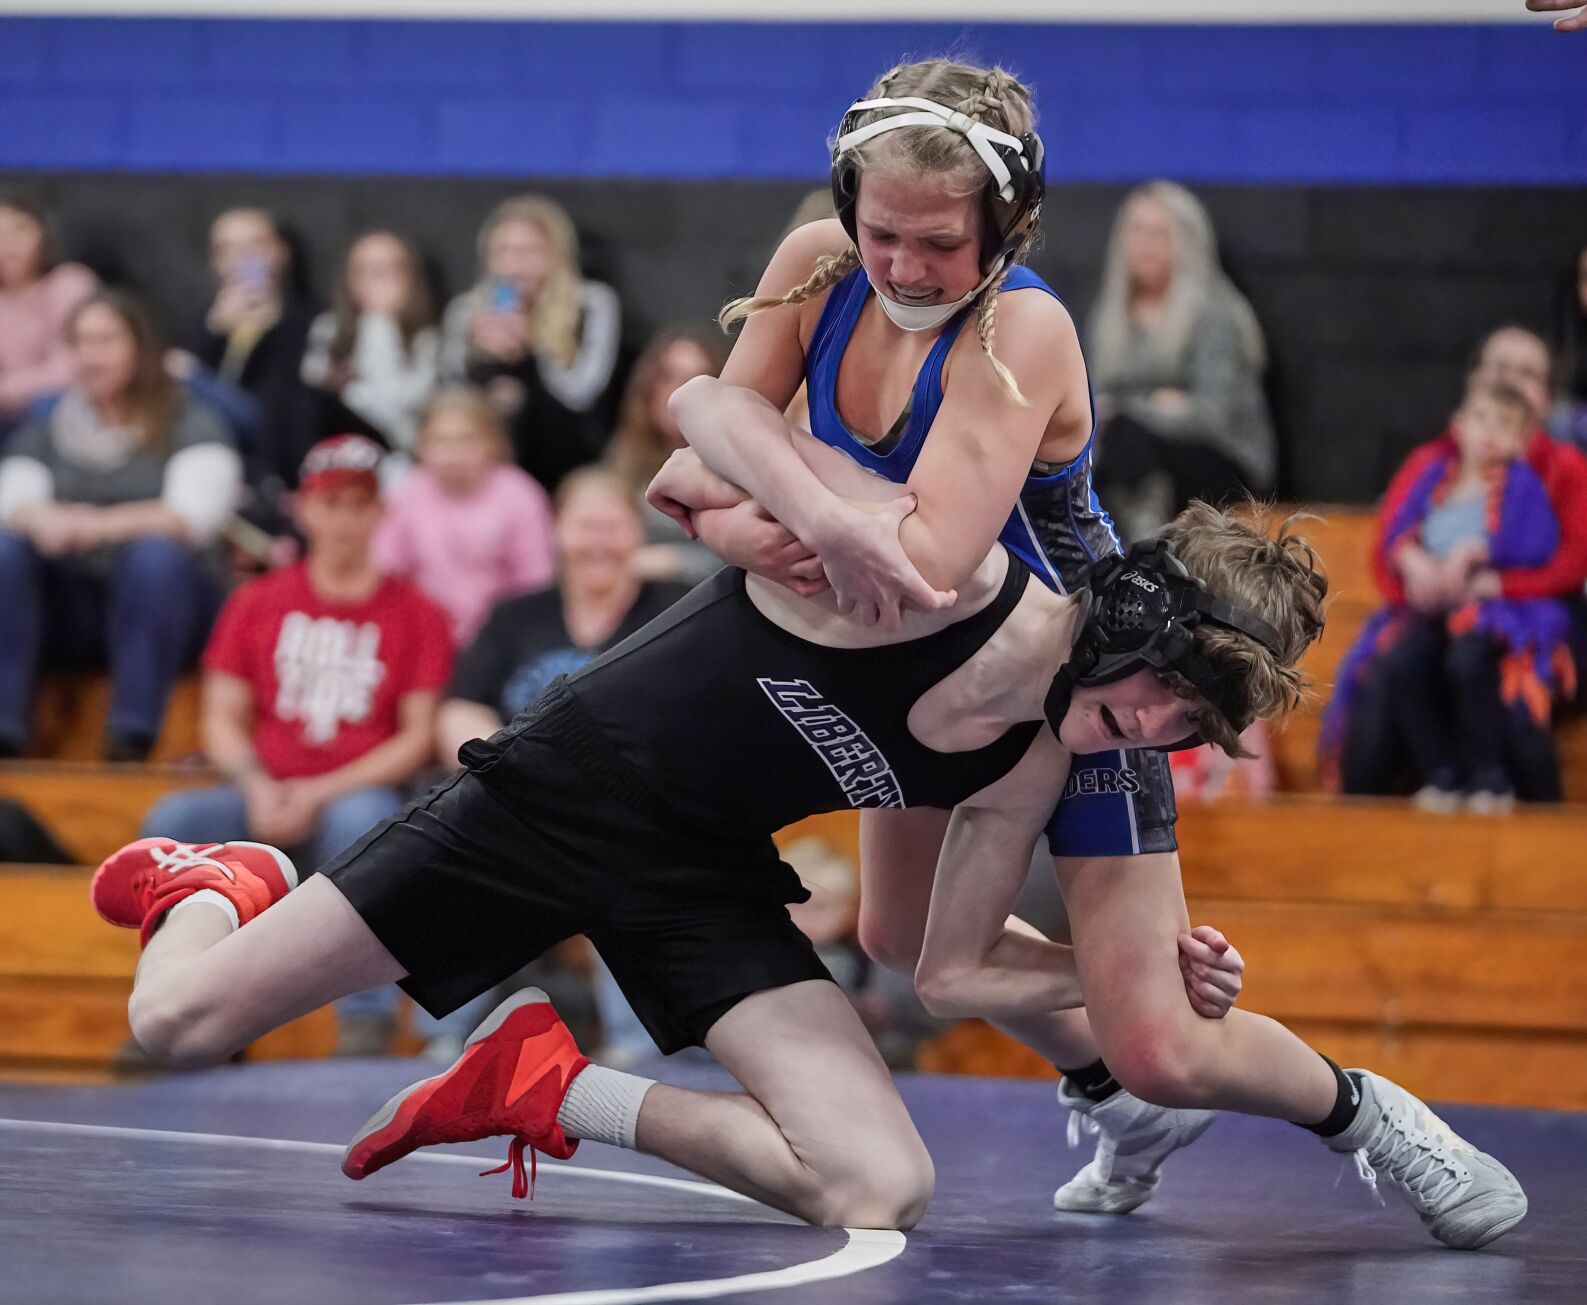 LOCAL ROUNDUP EBMS wrestling tops Liberty 50-42